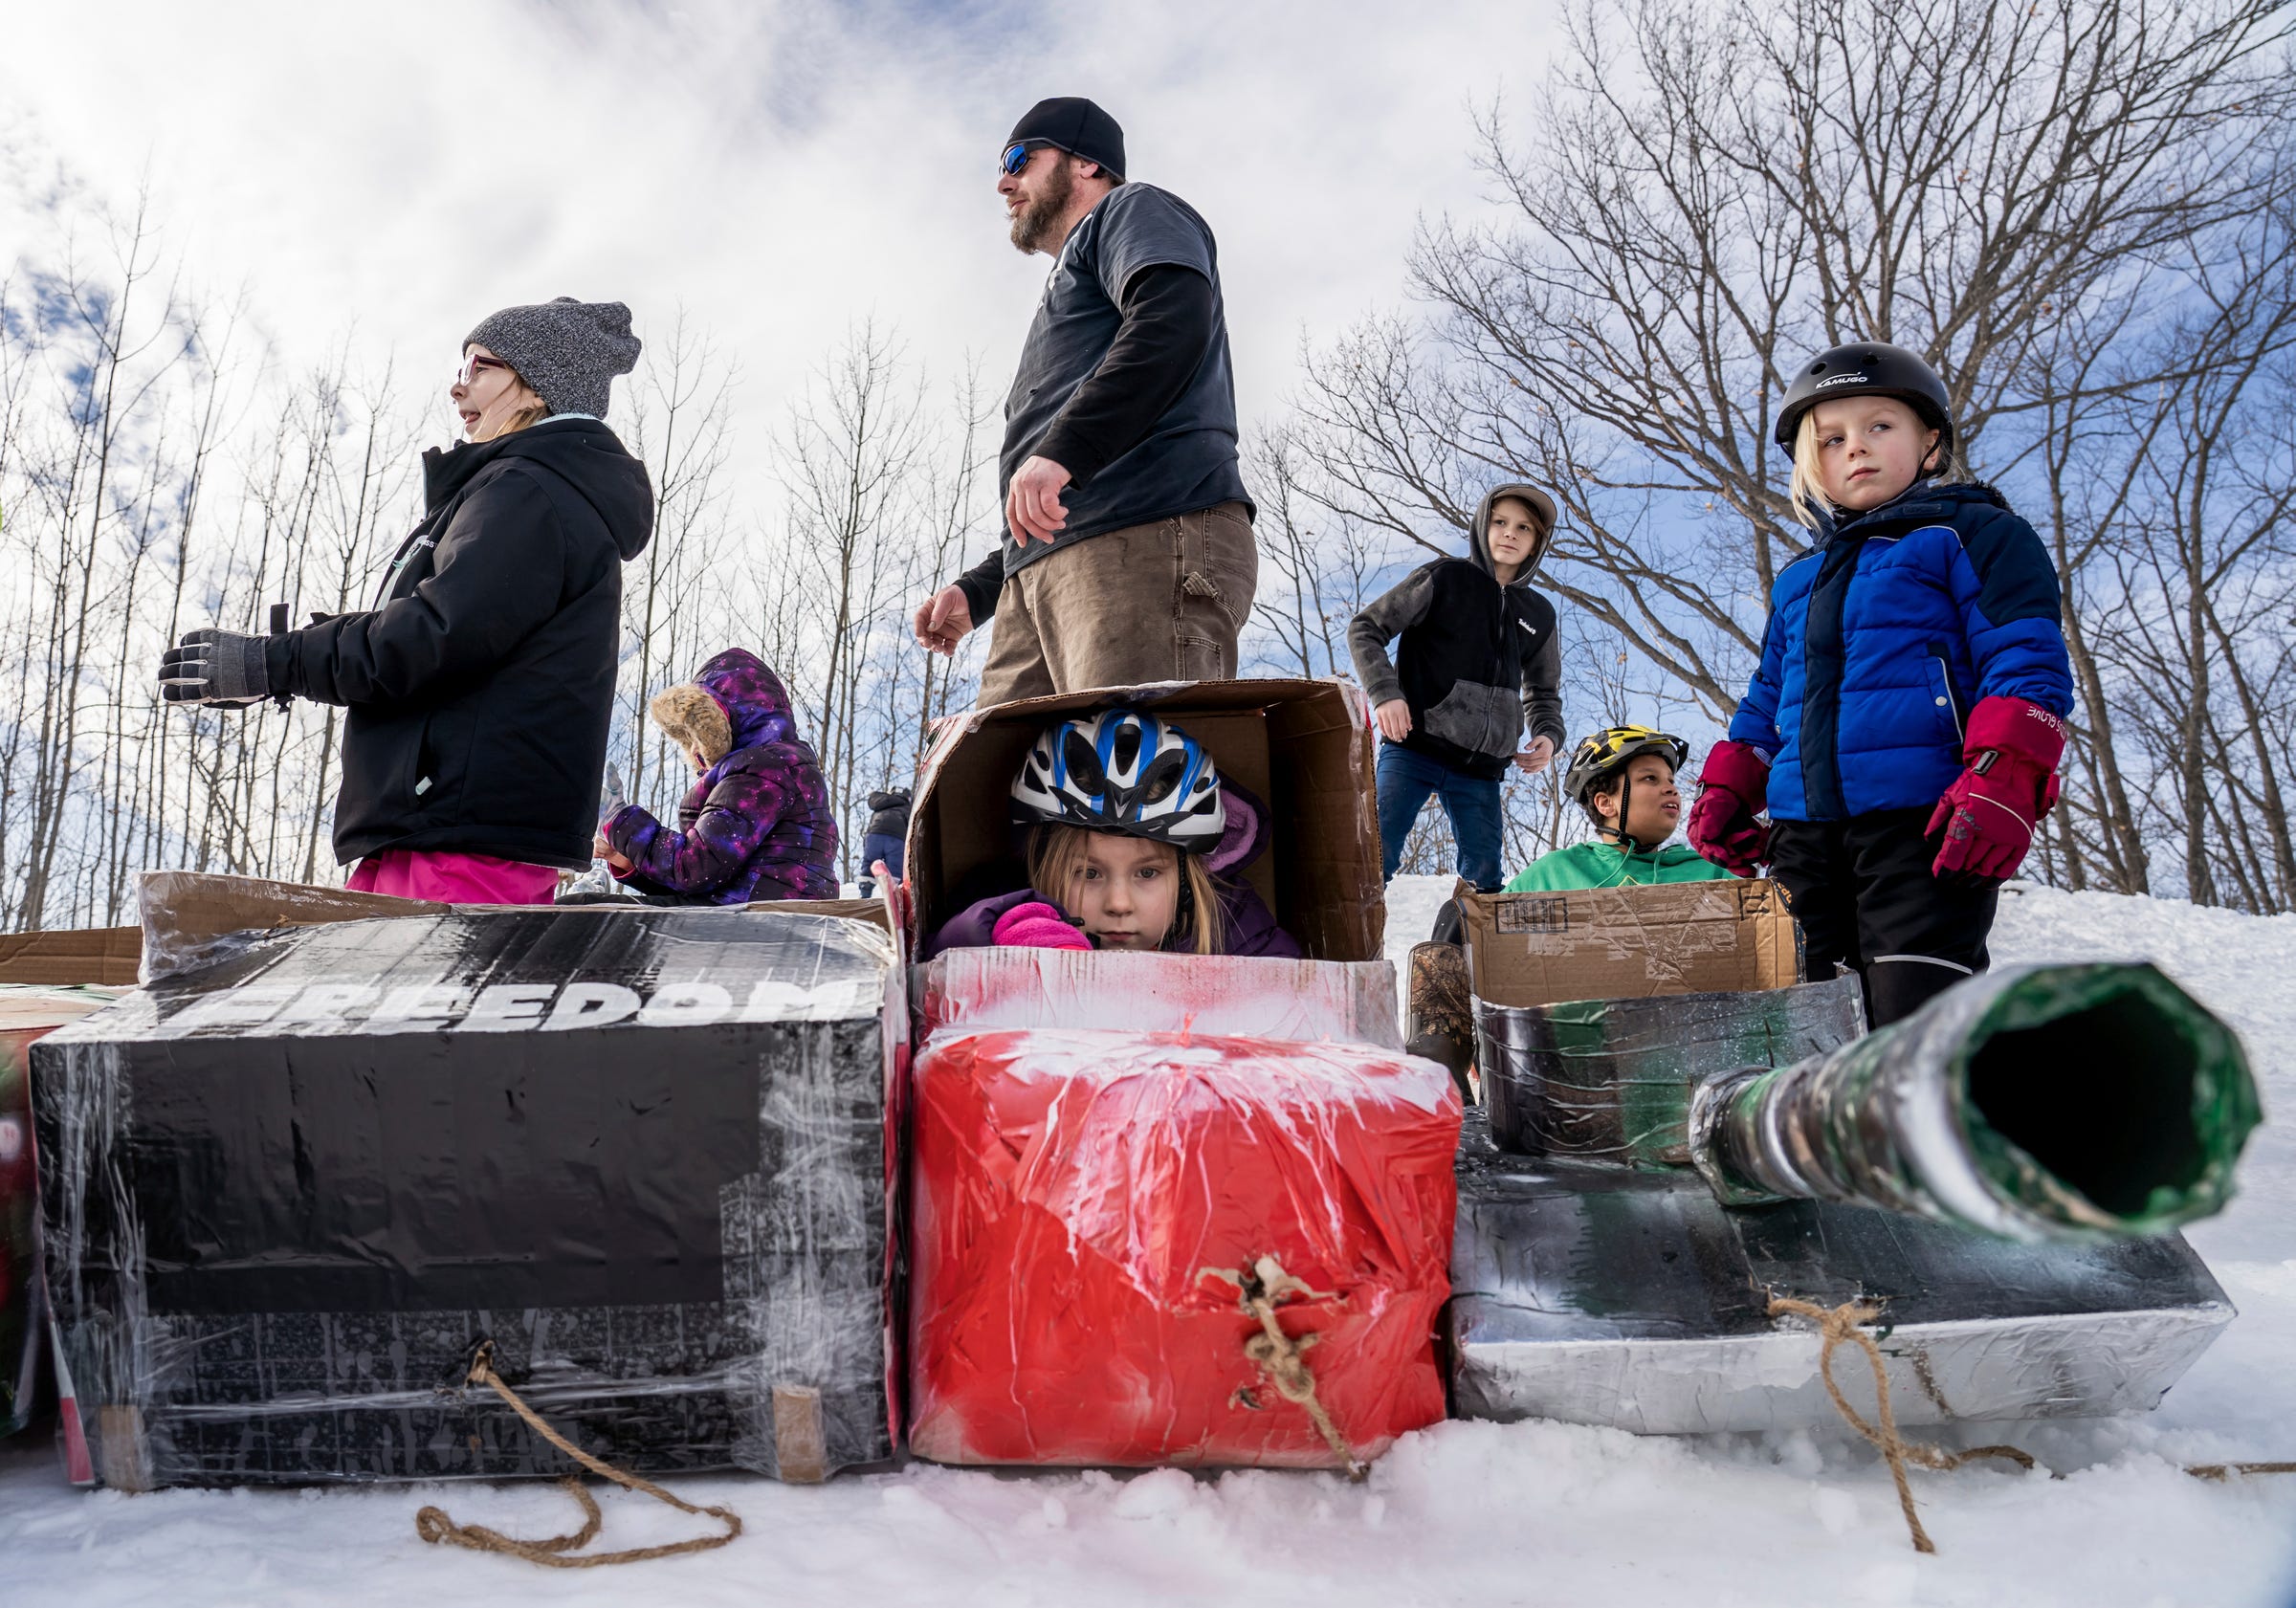 Isa Campbell, center, of Gwinn, sits in her cardboard sled as her father, Ambrose Campbell, of Gwinn, sister Aryanna Campbell, left, and brother Ambrose Brody Campbell Jr., right, wait for the start of the K.I. Sawyer Cardboard Sled Races on Feb. 11, 2023.